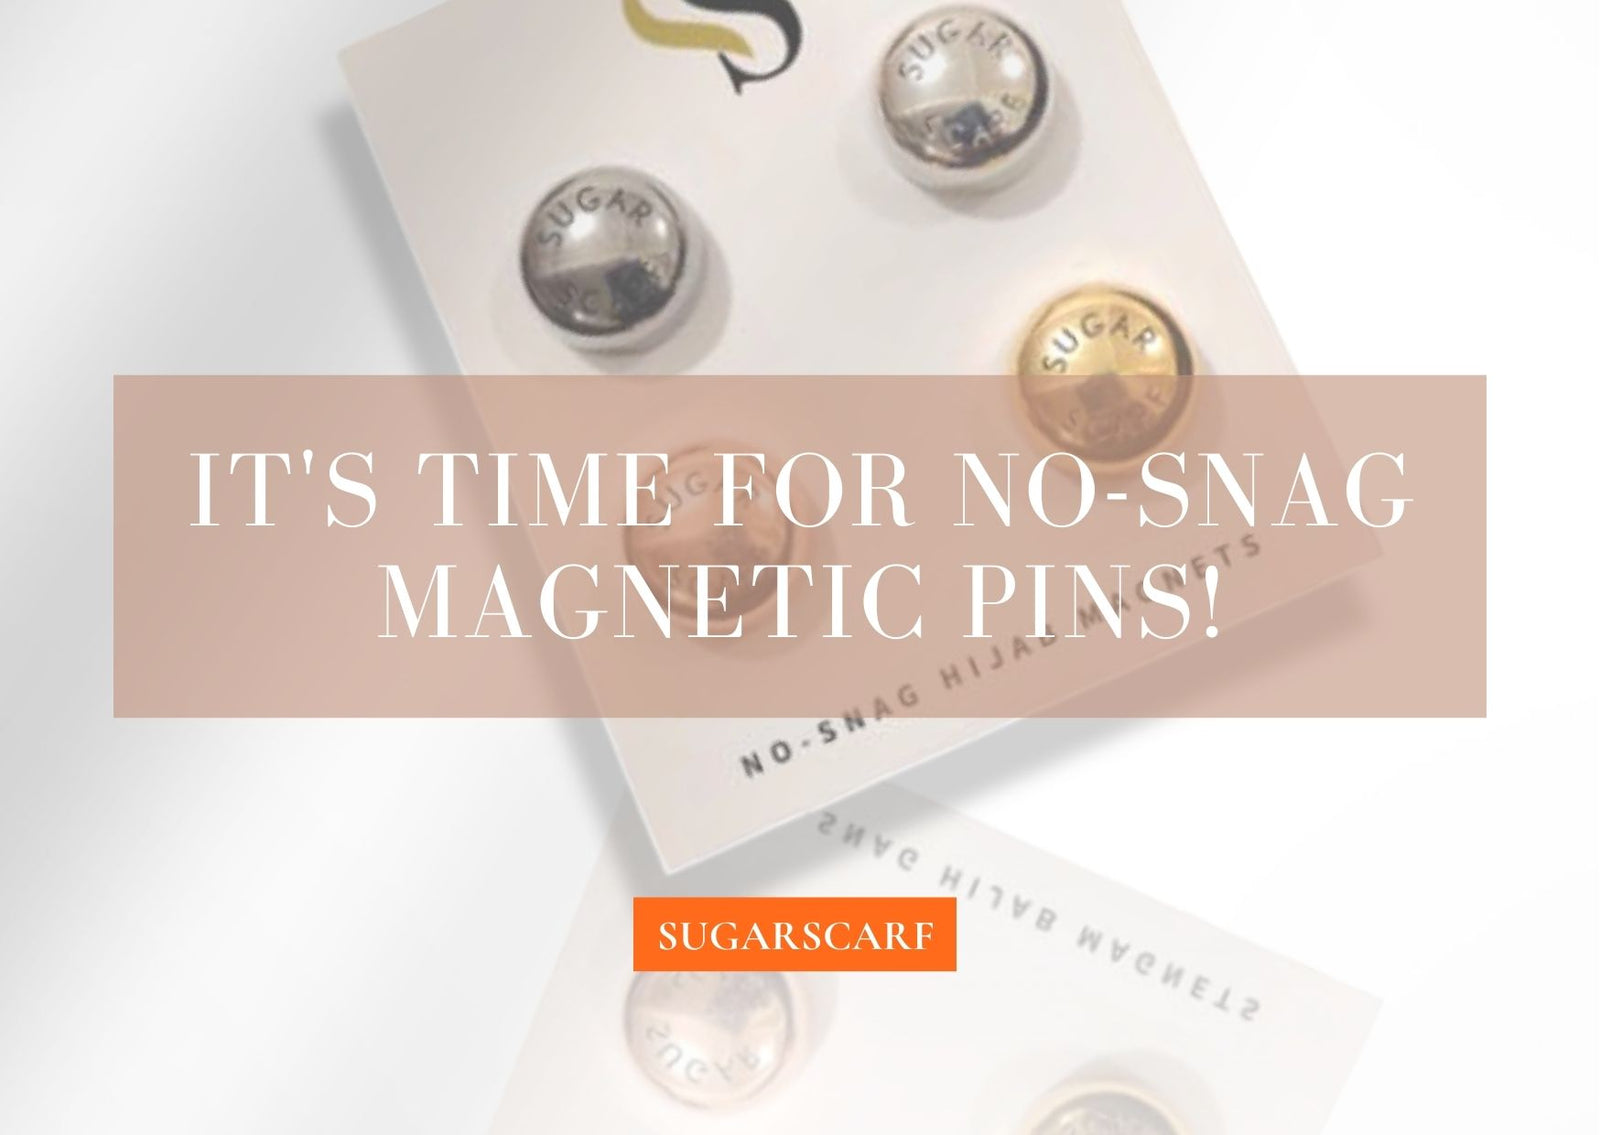 January means... It's time for no-snag magnetic pins!